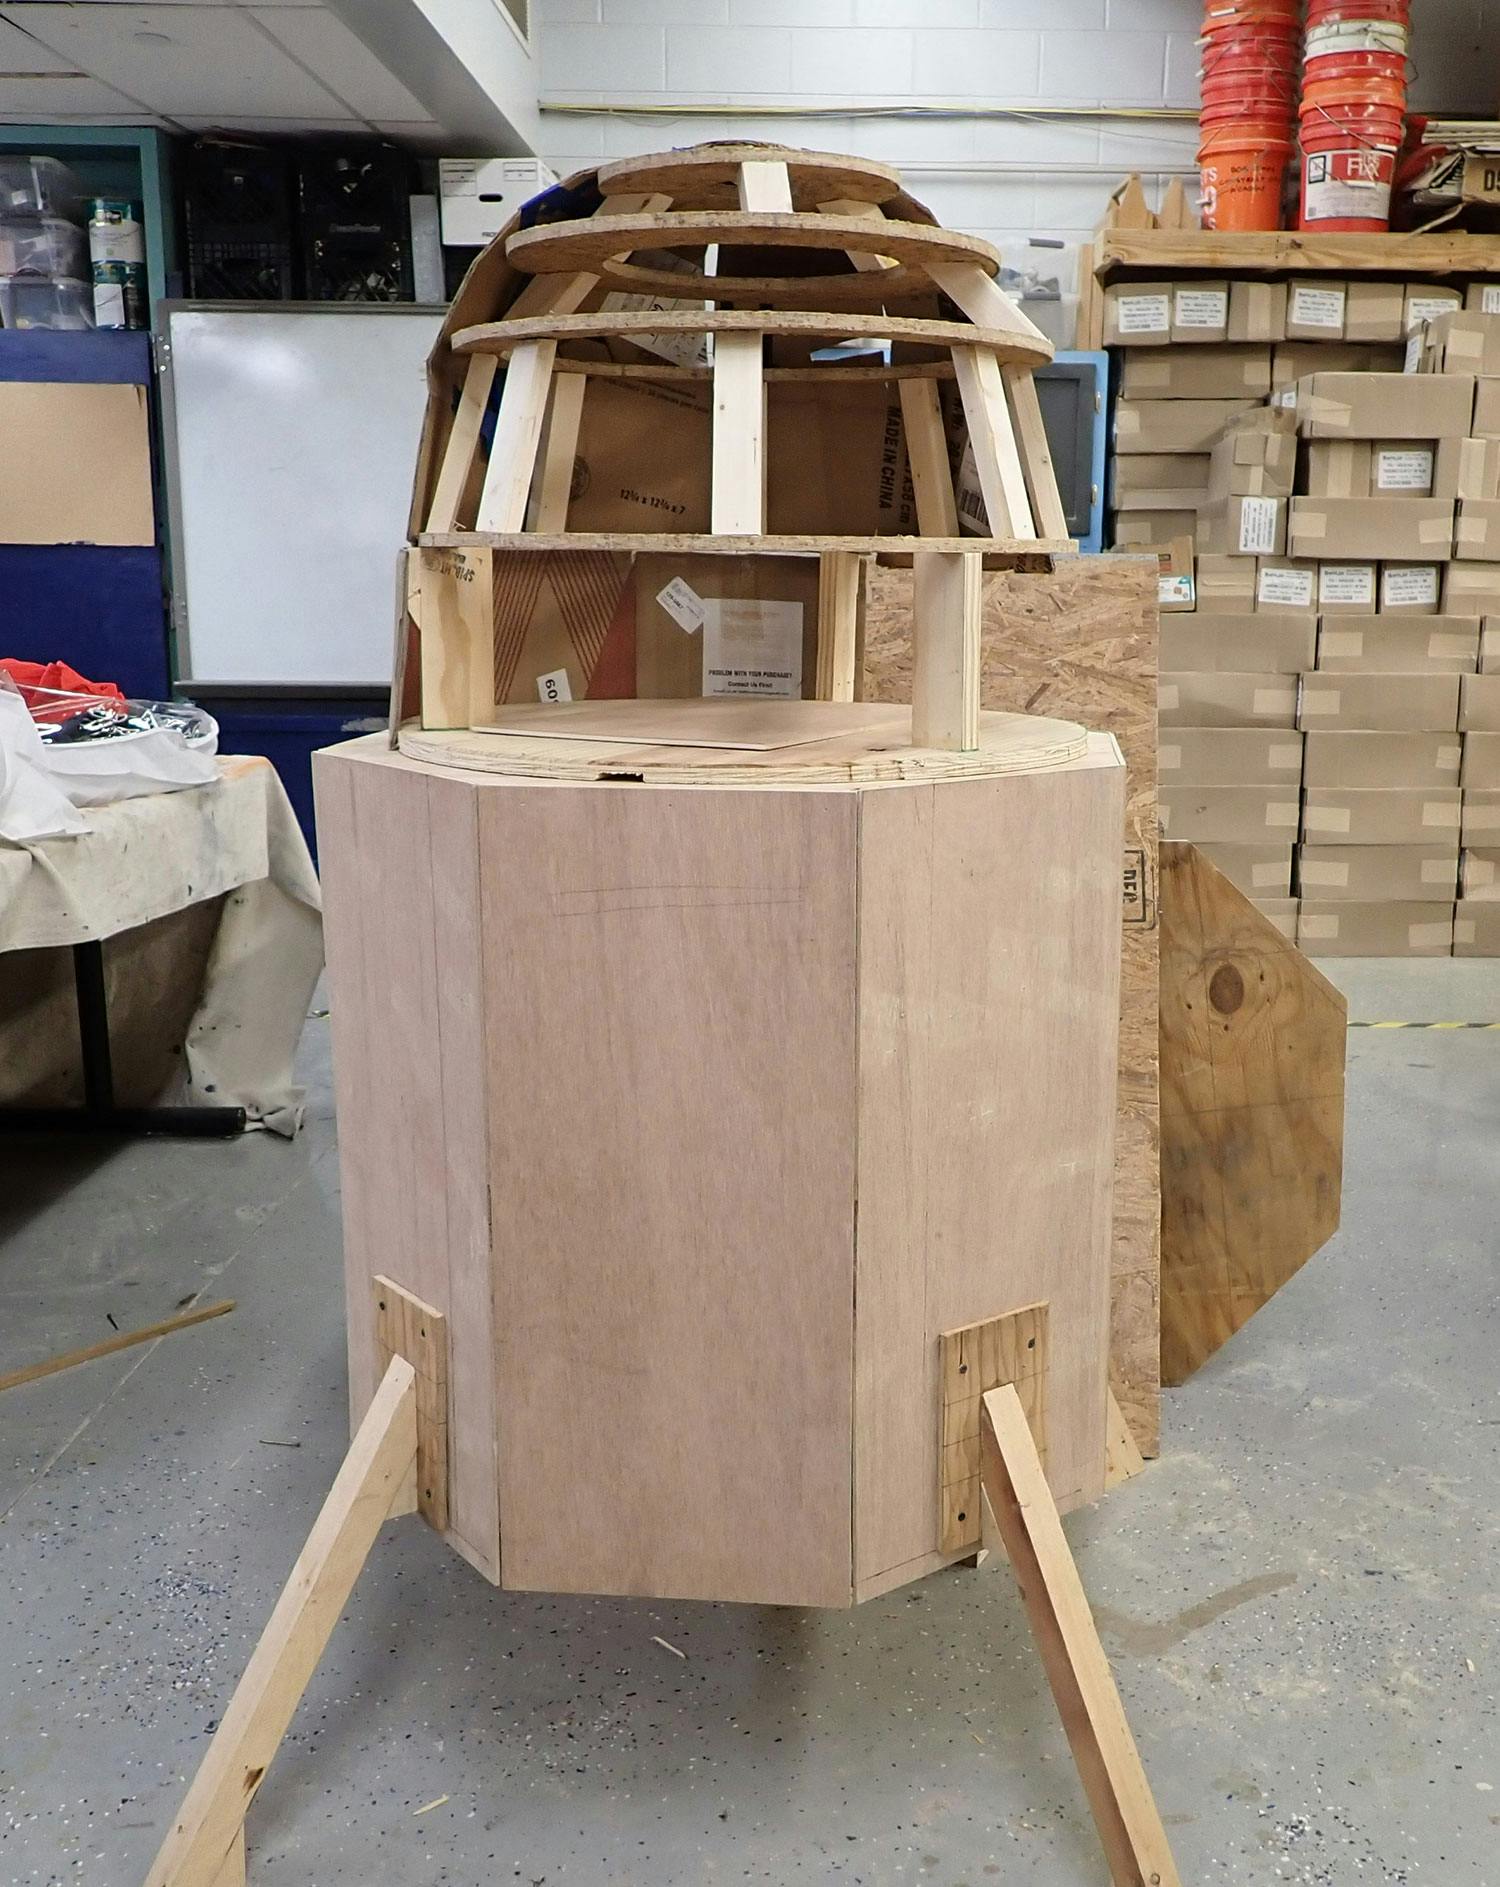 Small rocket built out of wood